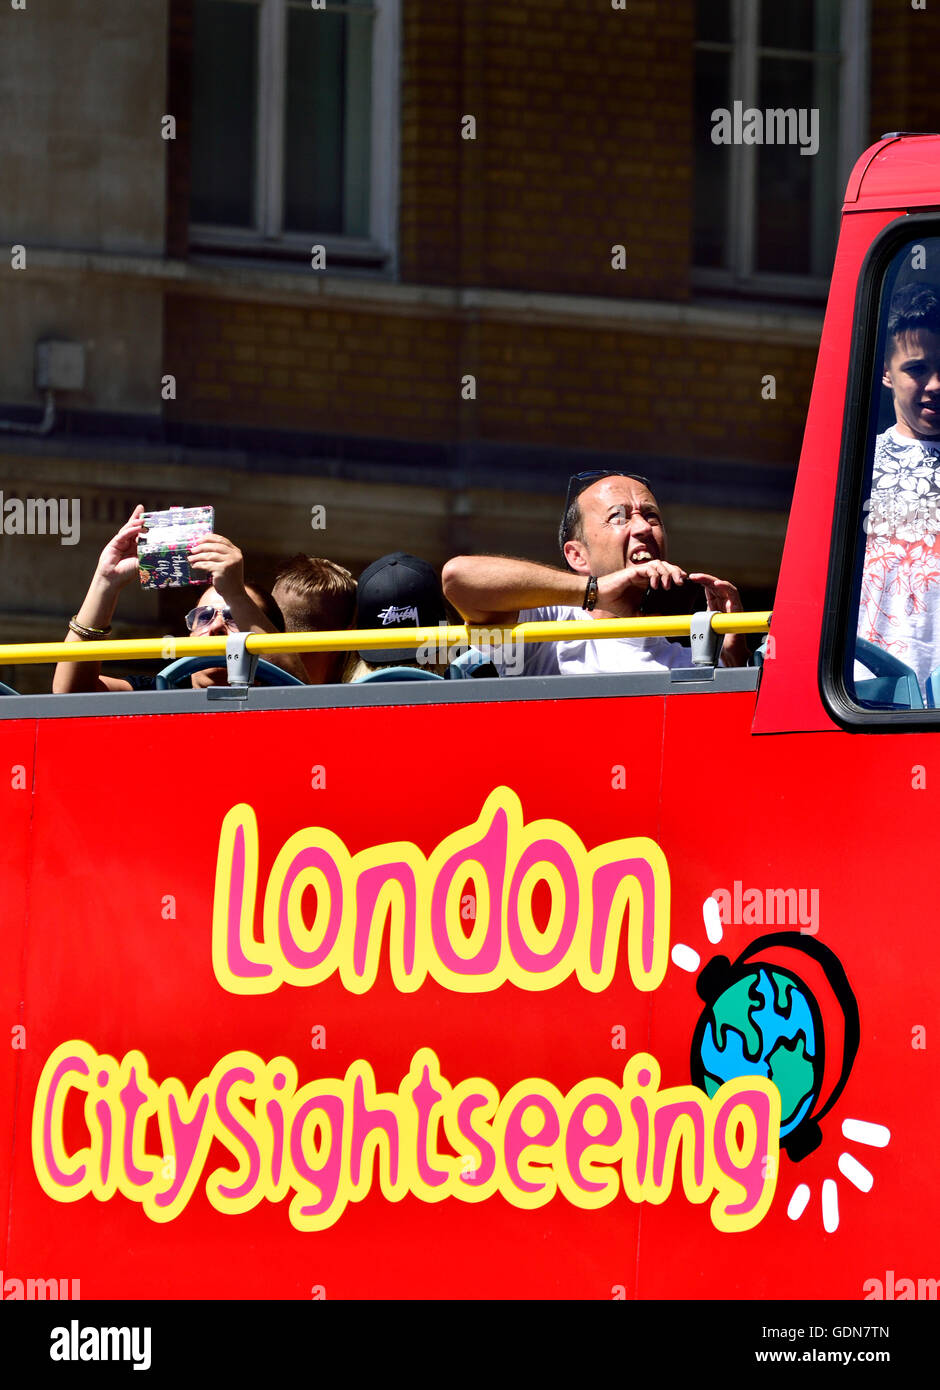 London, England, UK. Tourists on the top floor of an open-top sightseeing bus Stock Photo